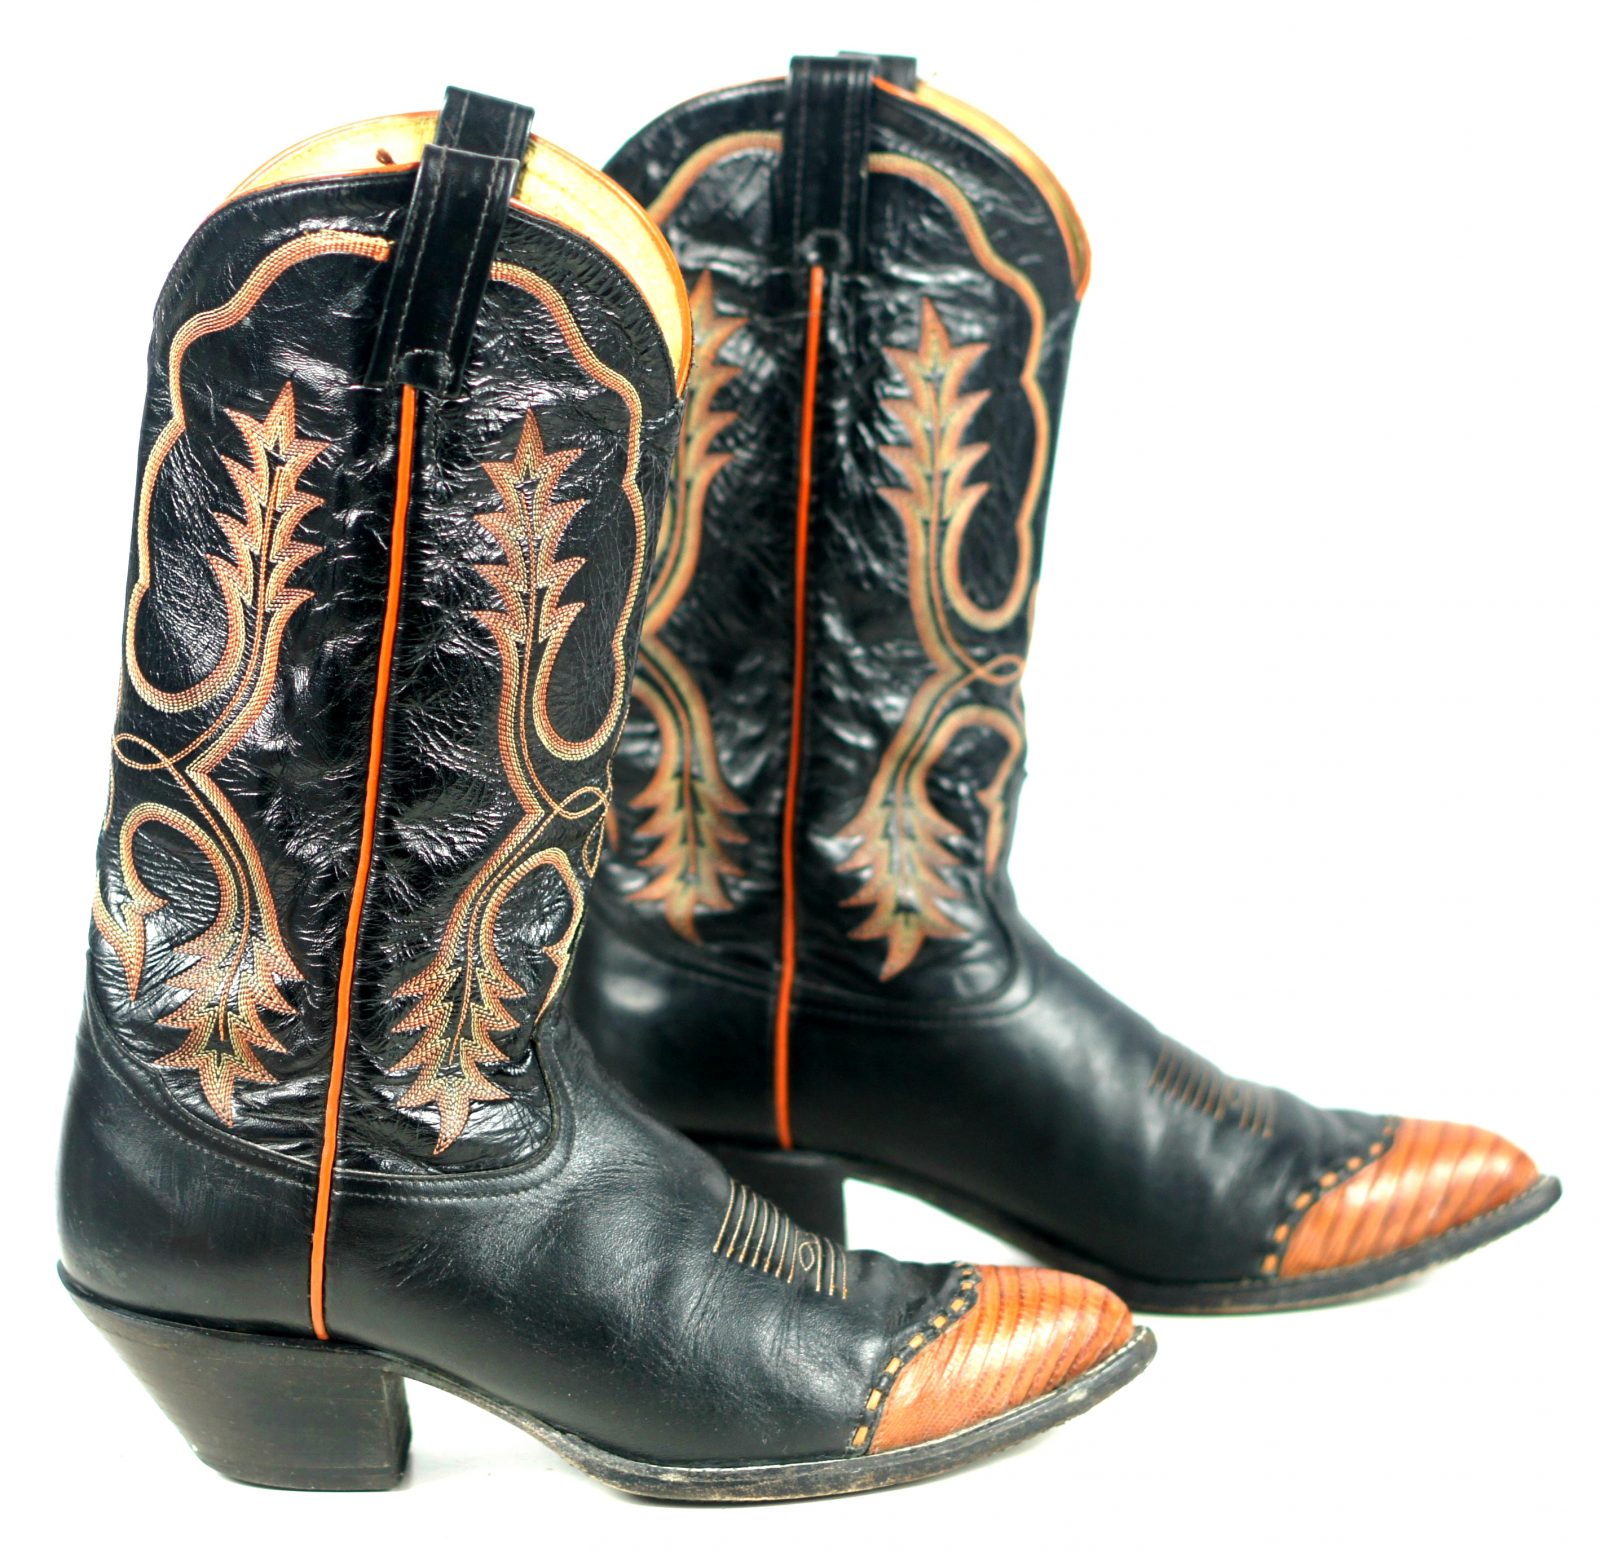 are tony lama boots made in usa